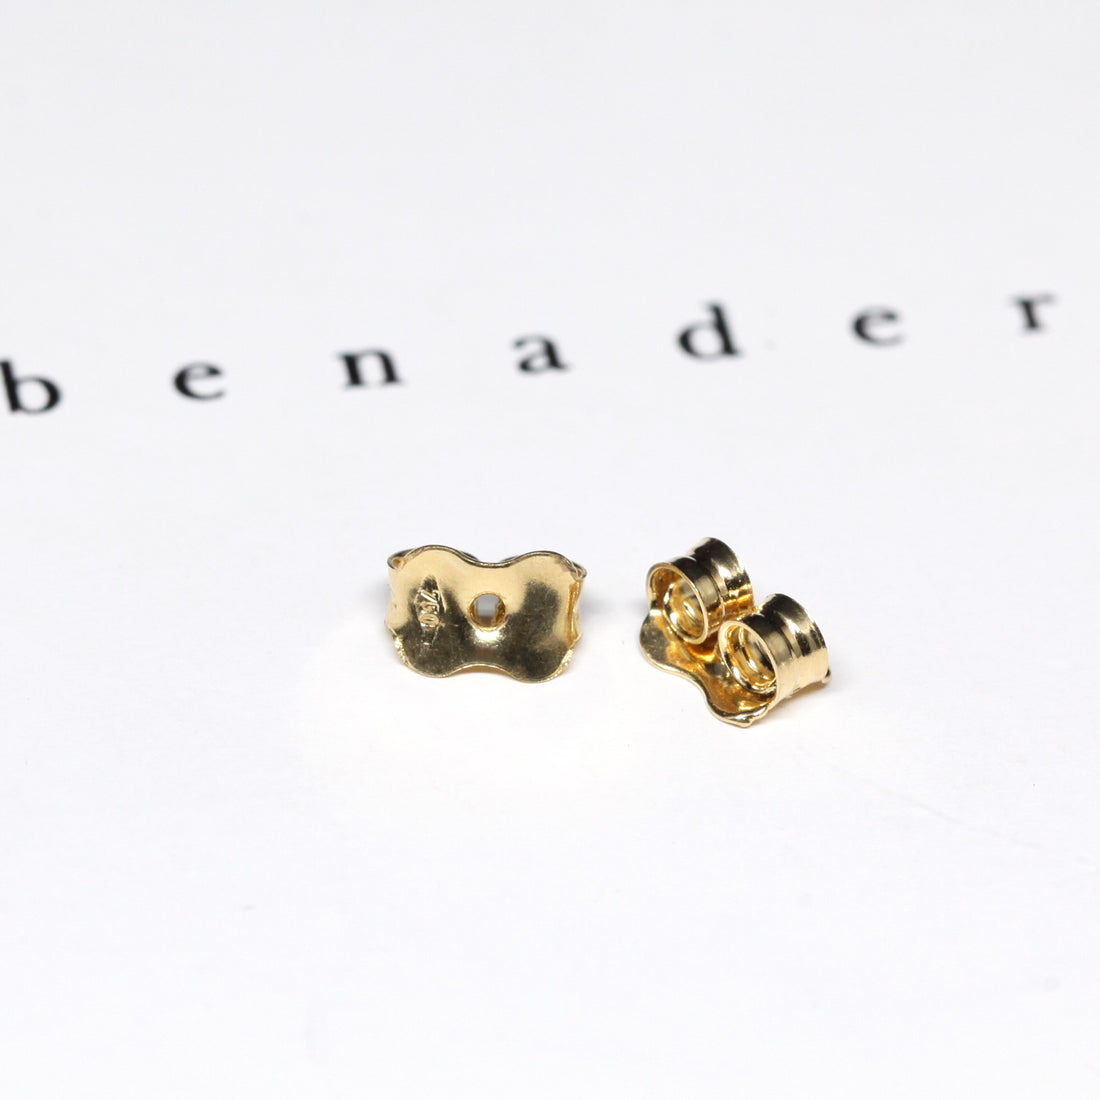 bena jewelry gold friction earrings back for custom gemstone stud earrings made in montreal